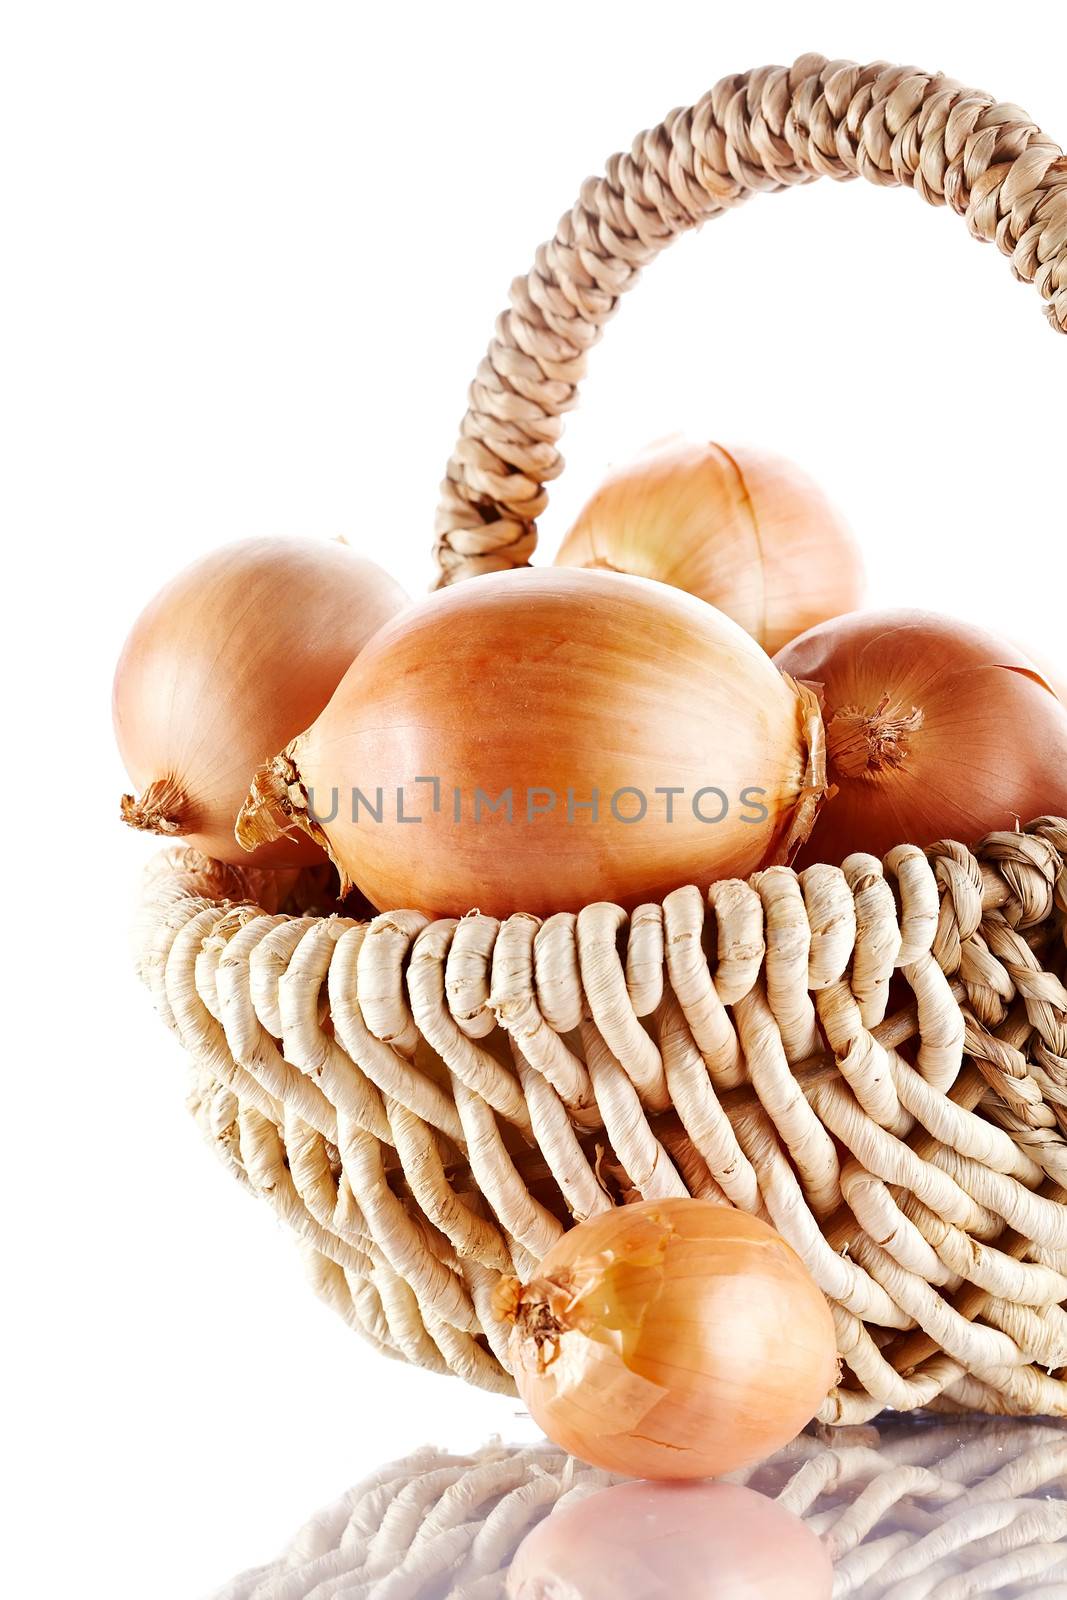 Onions napiform in a wattled basket. Onions napiform. Vegetables in a basket.